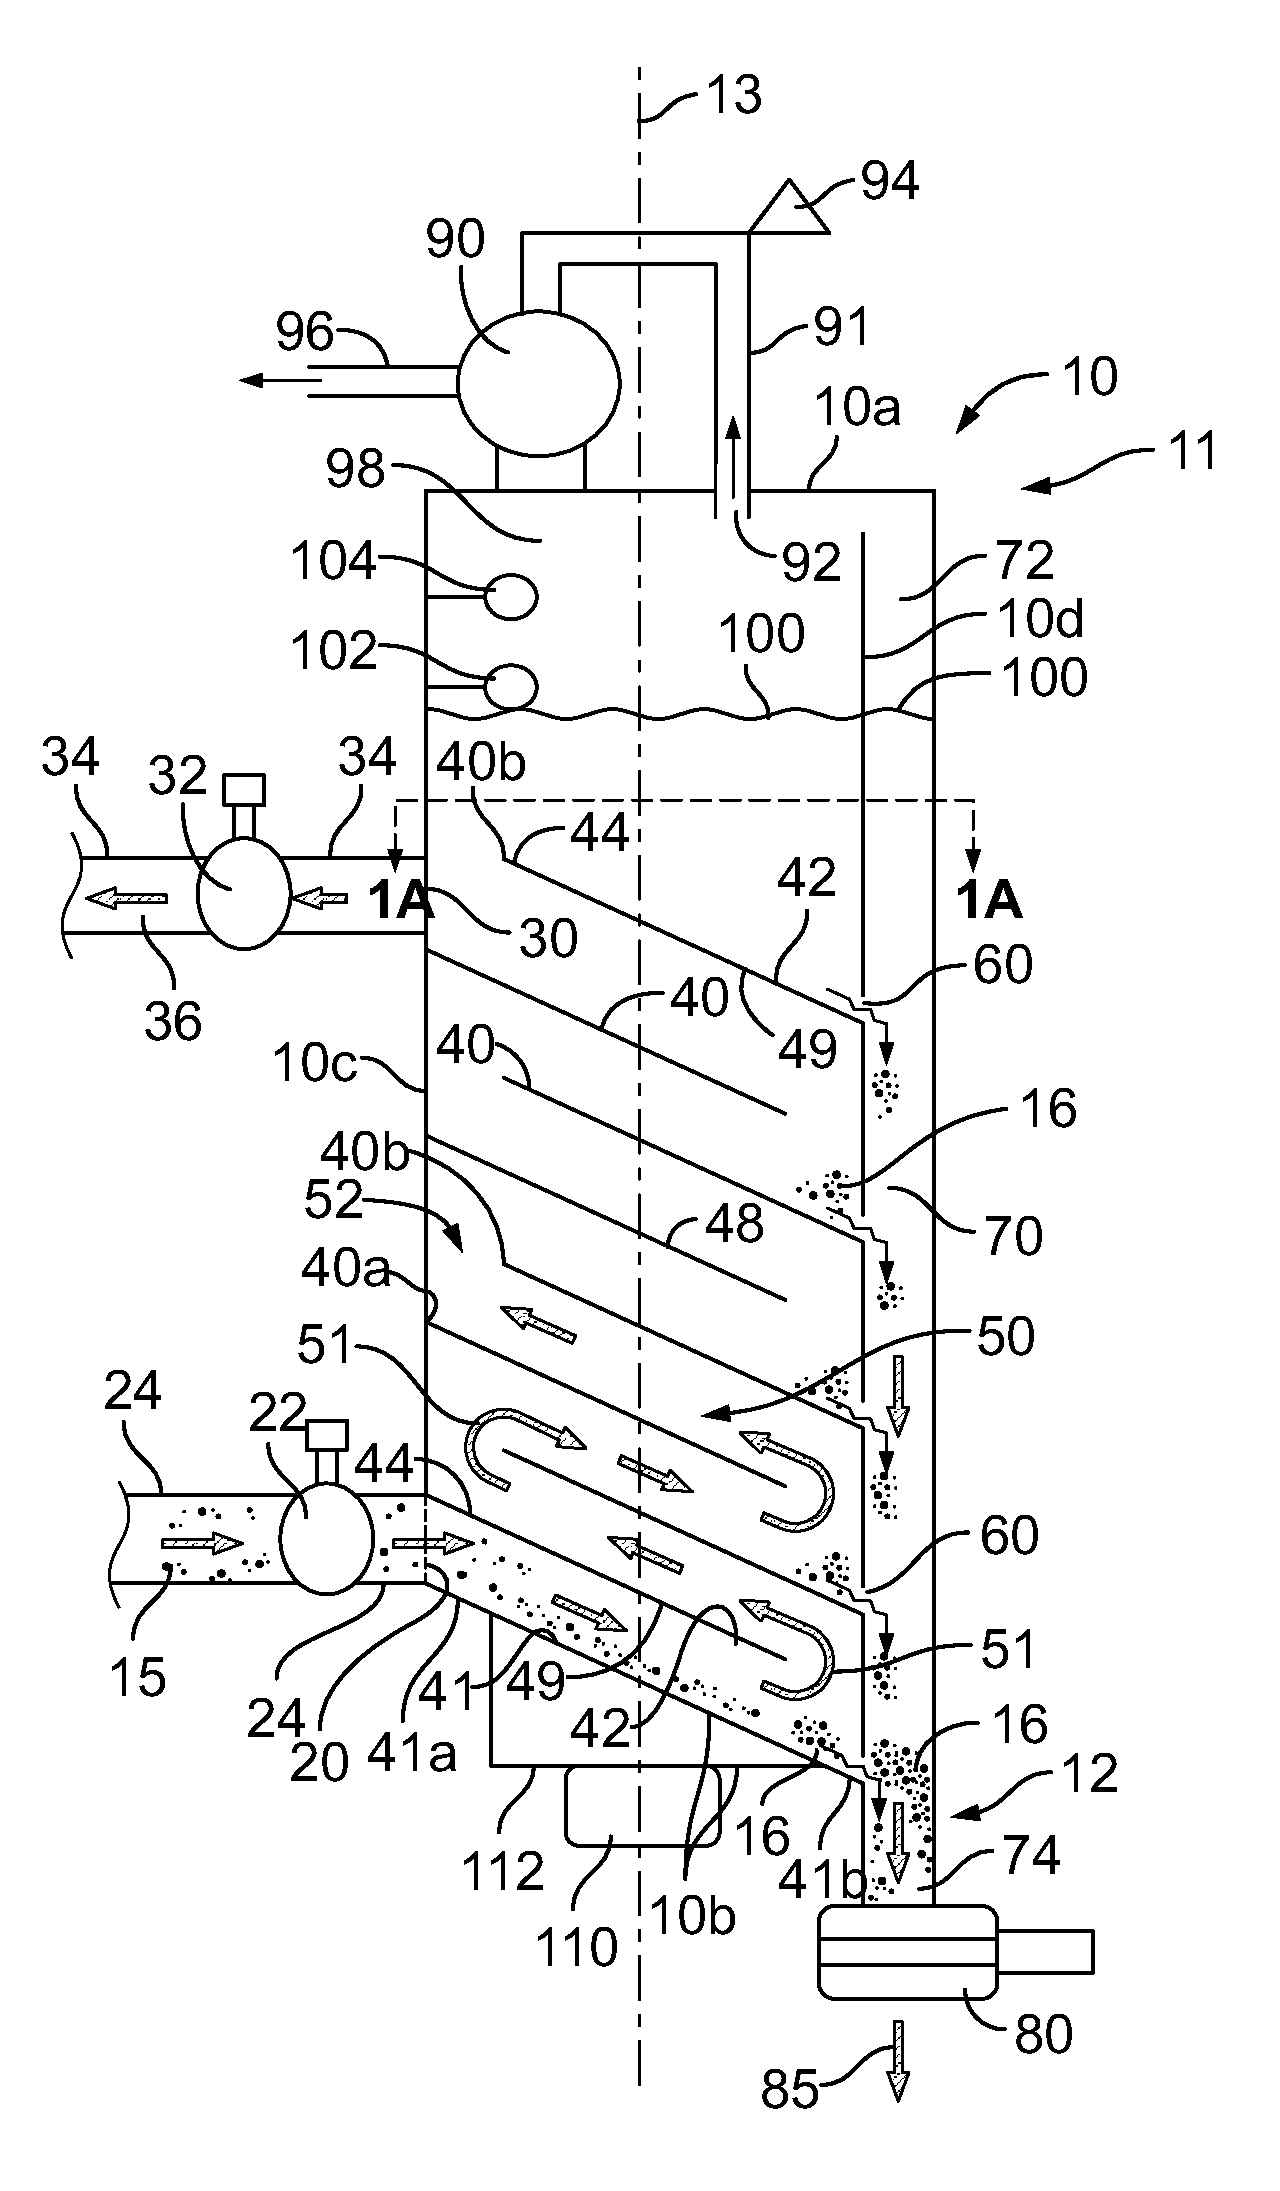 Solids removal system and method